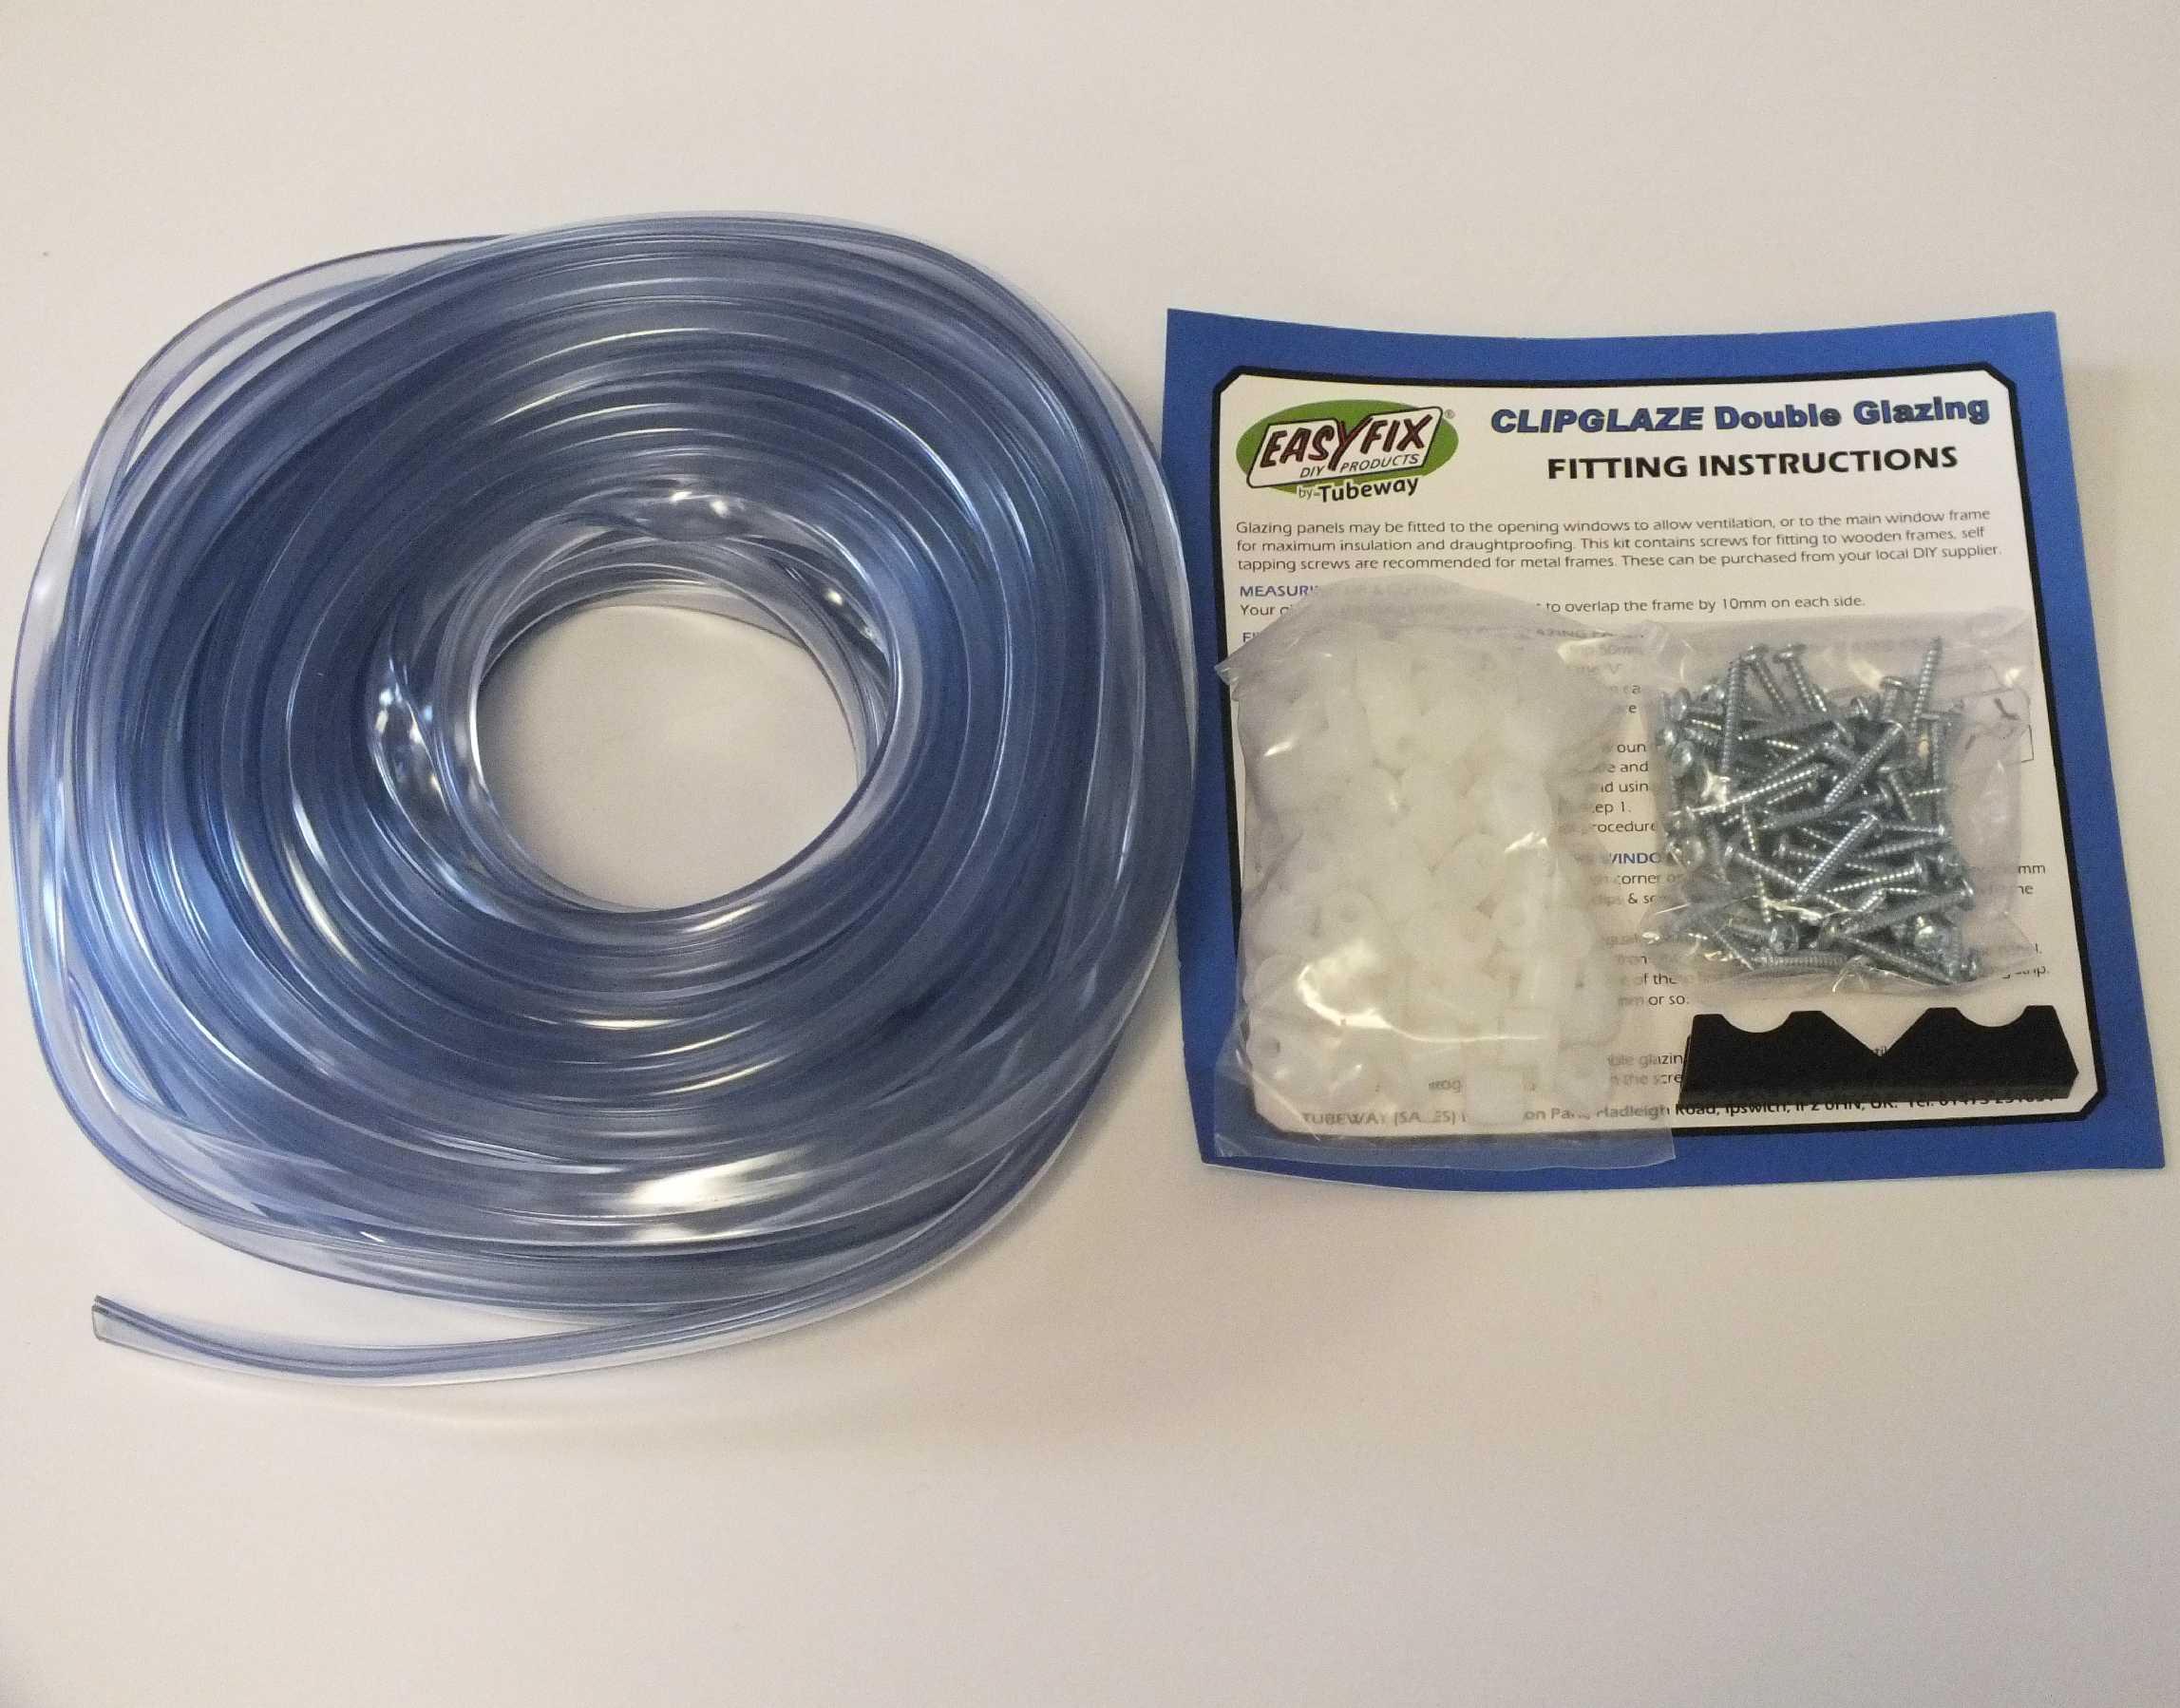 Buy Easyfix Clipglaze Edging Kit - 15m roll of edging for 2mm Glazing Thickness, Clear online today